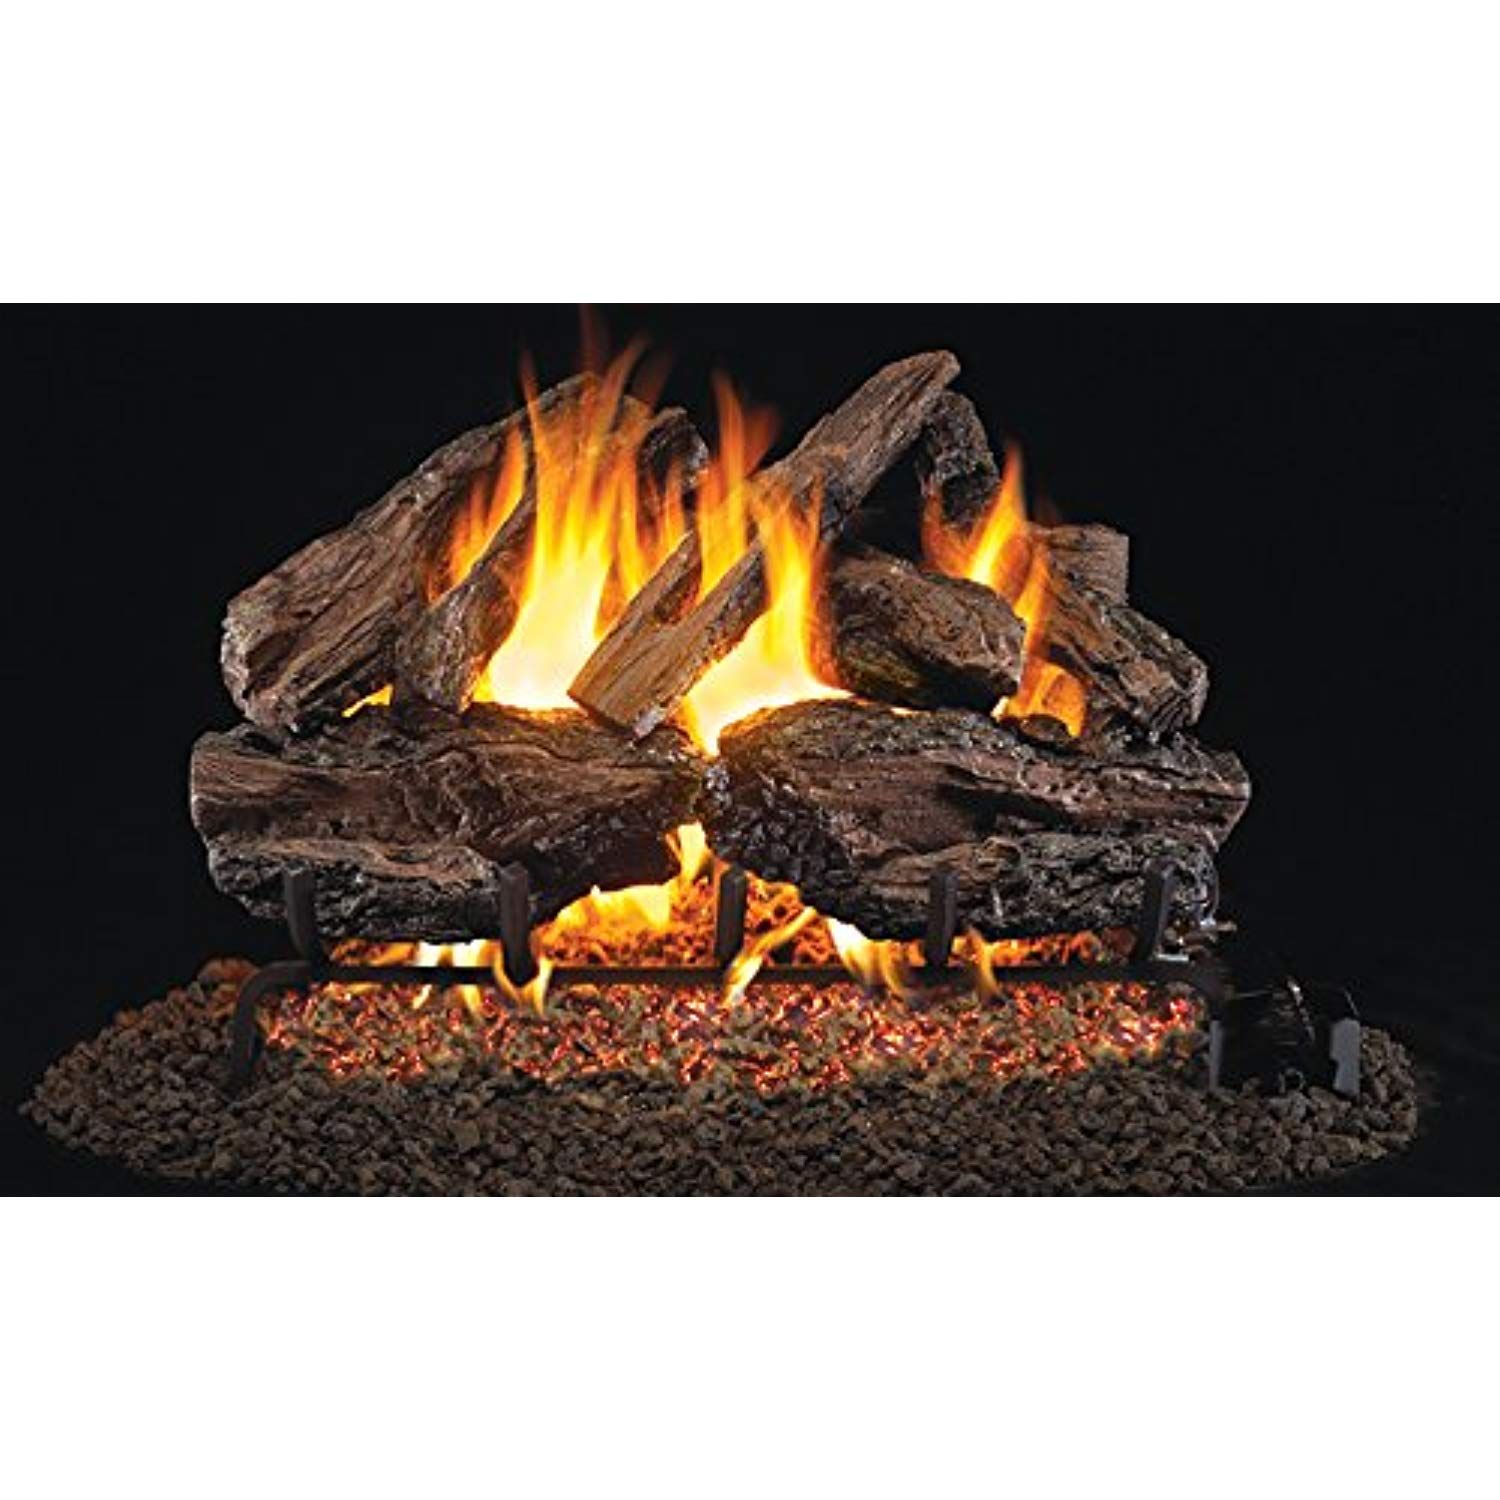 Duluth forge Fireplace Inspirational Real Fyre 18 Inch Charred Red Oak Vented Gas Logs Bundled